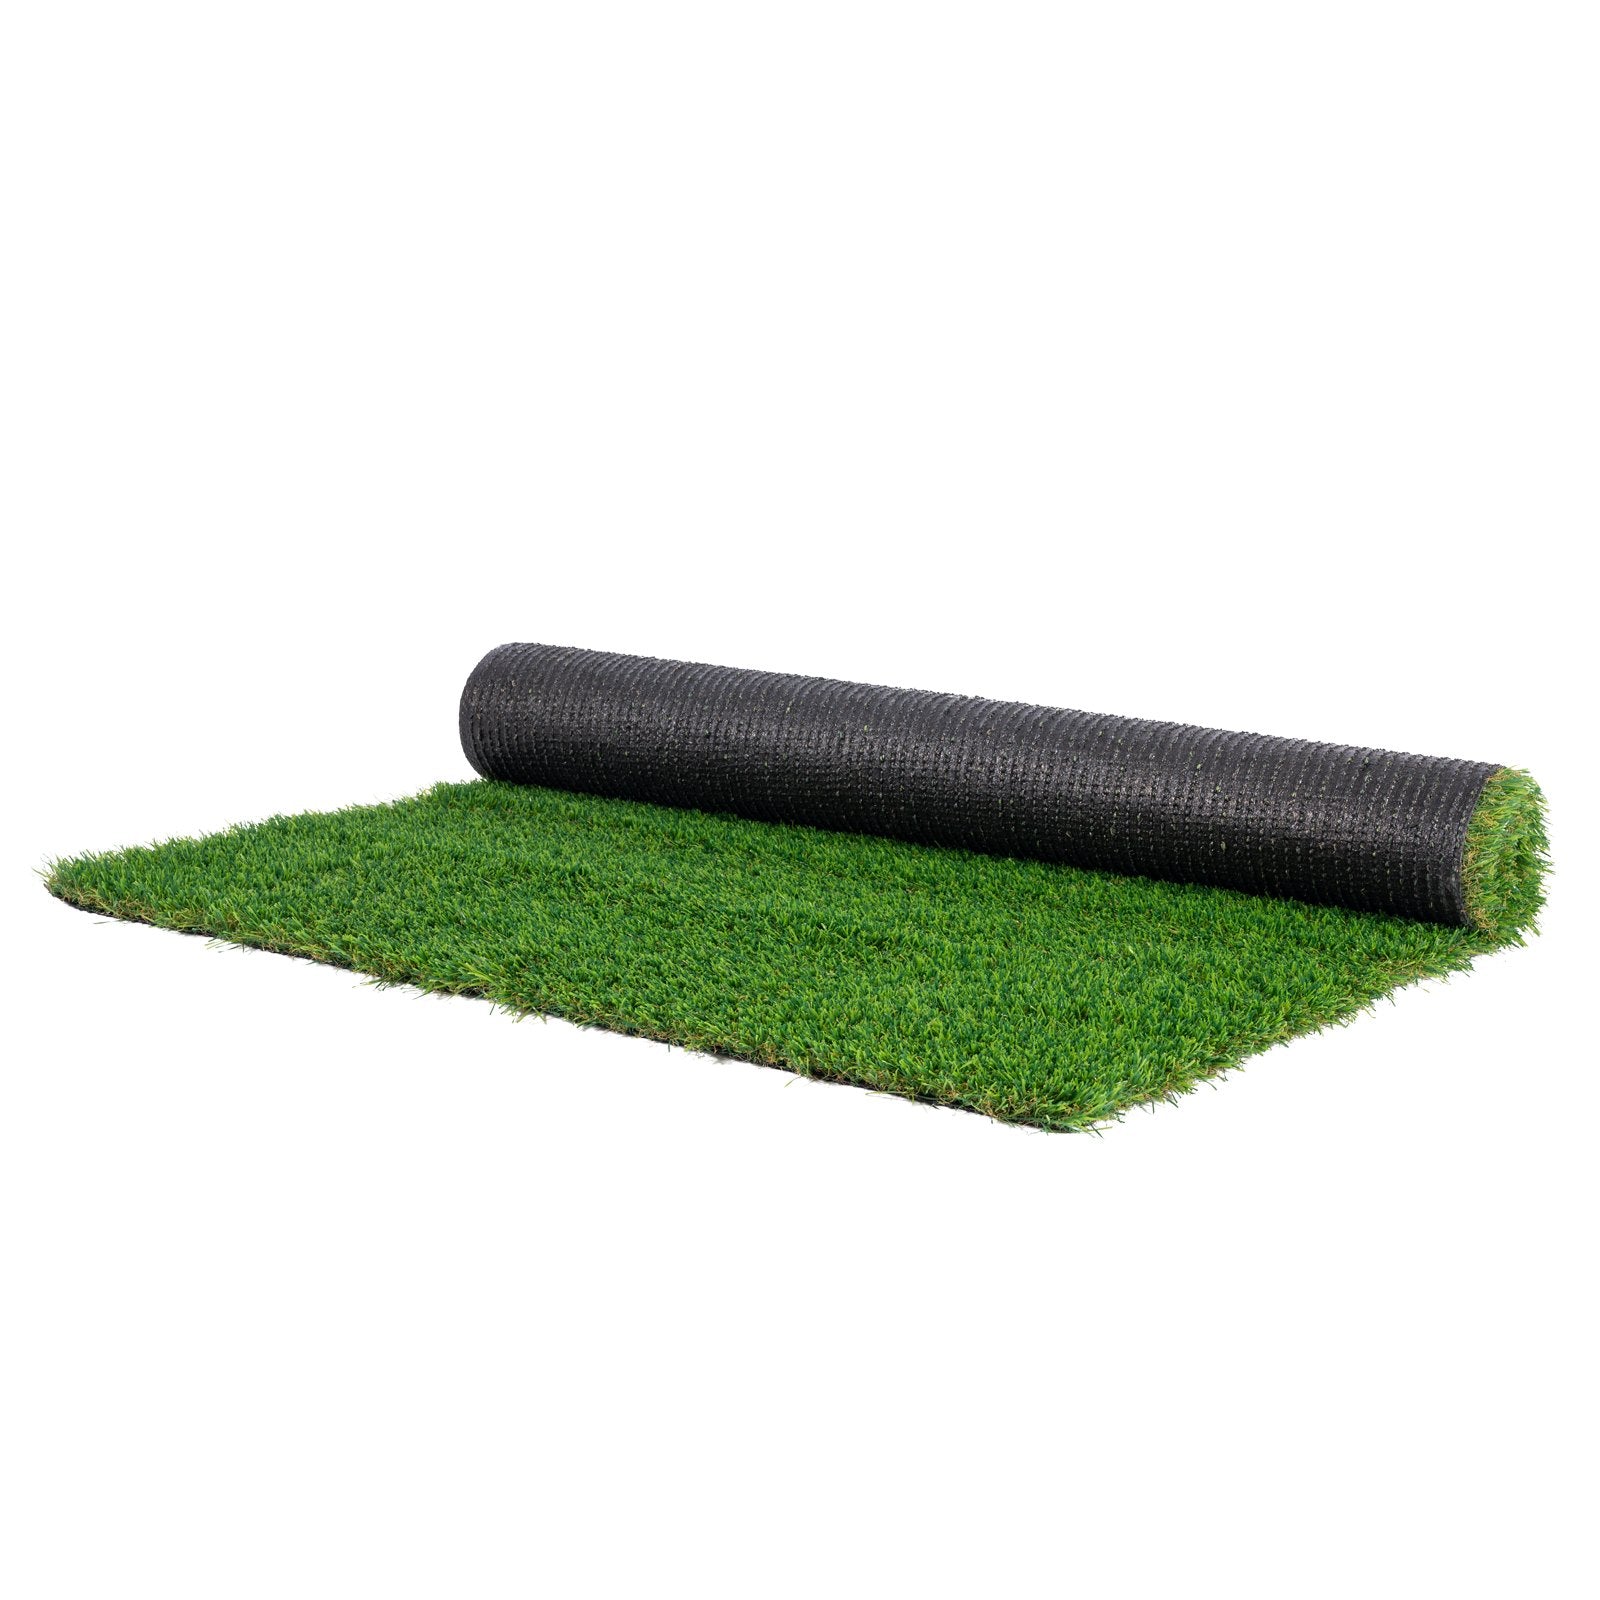 VEVOR Artifical Grass, 5 x 10 ft Rug Green Turf, 1.38"Fake Door Mat Outdoor Patio Lawn Decoration, Easy to Clean with Drainage Holes, Perfect For Multi-Purpose Home Indoor Entryway Scraper Dog Mats-8